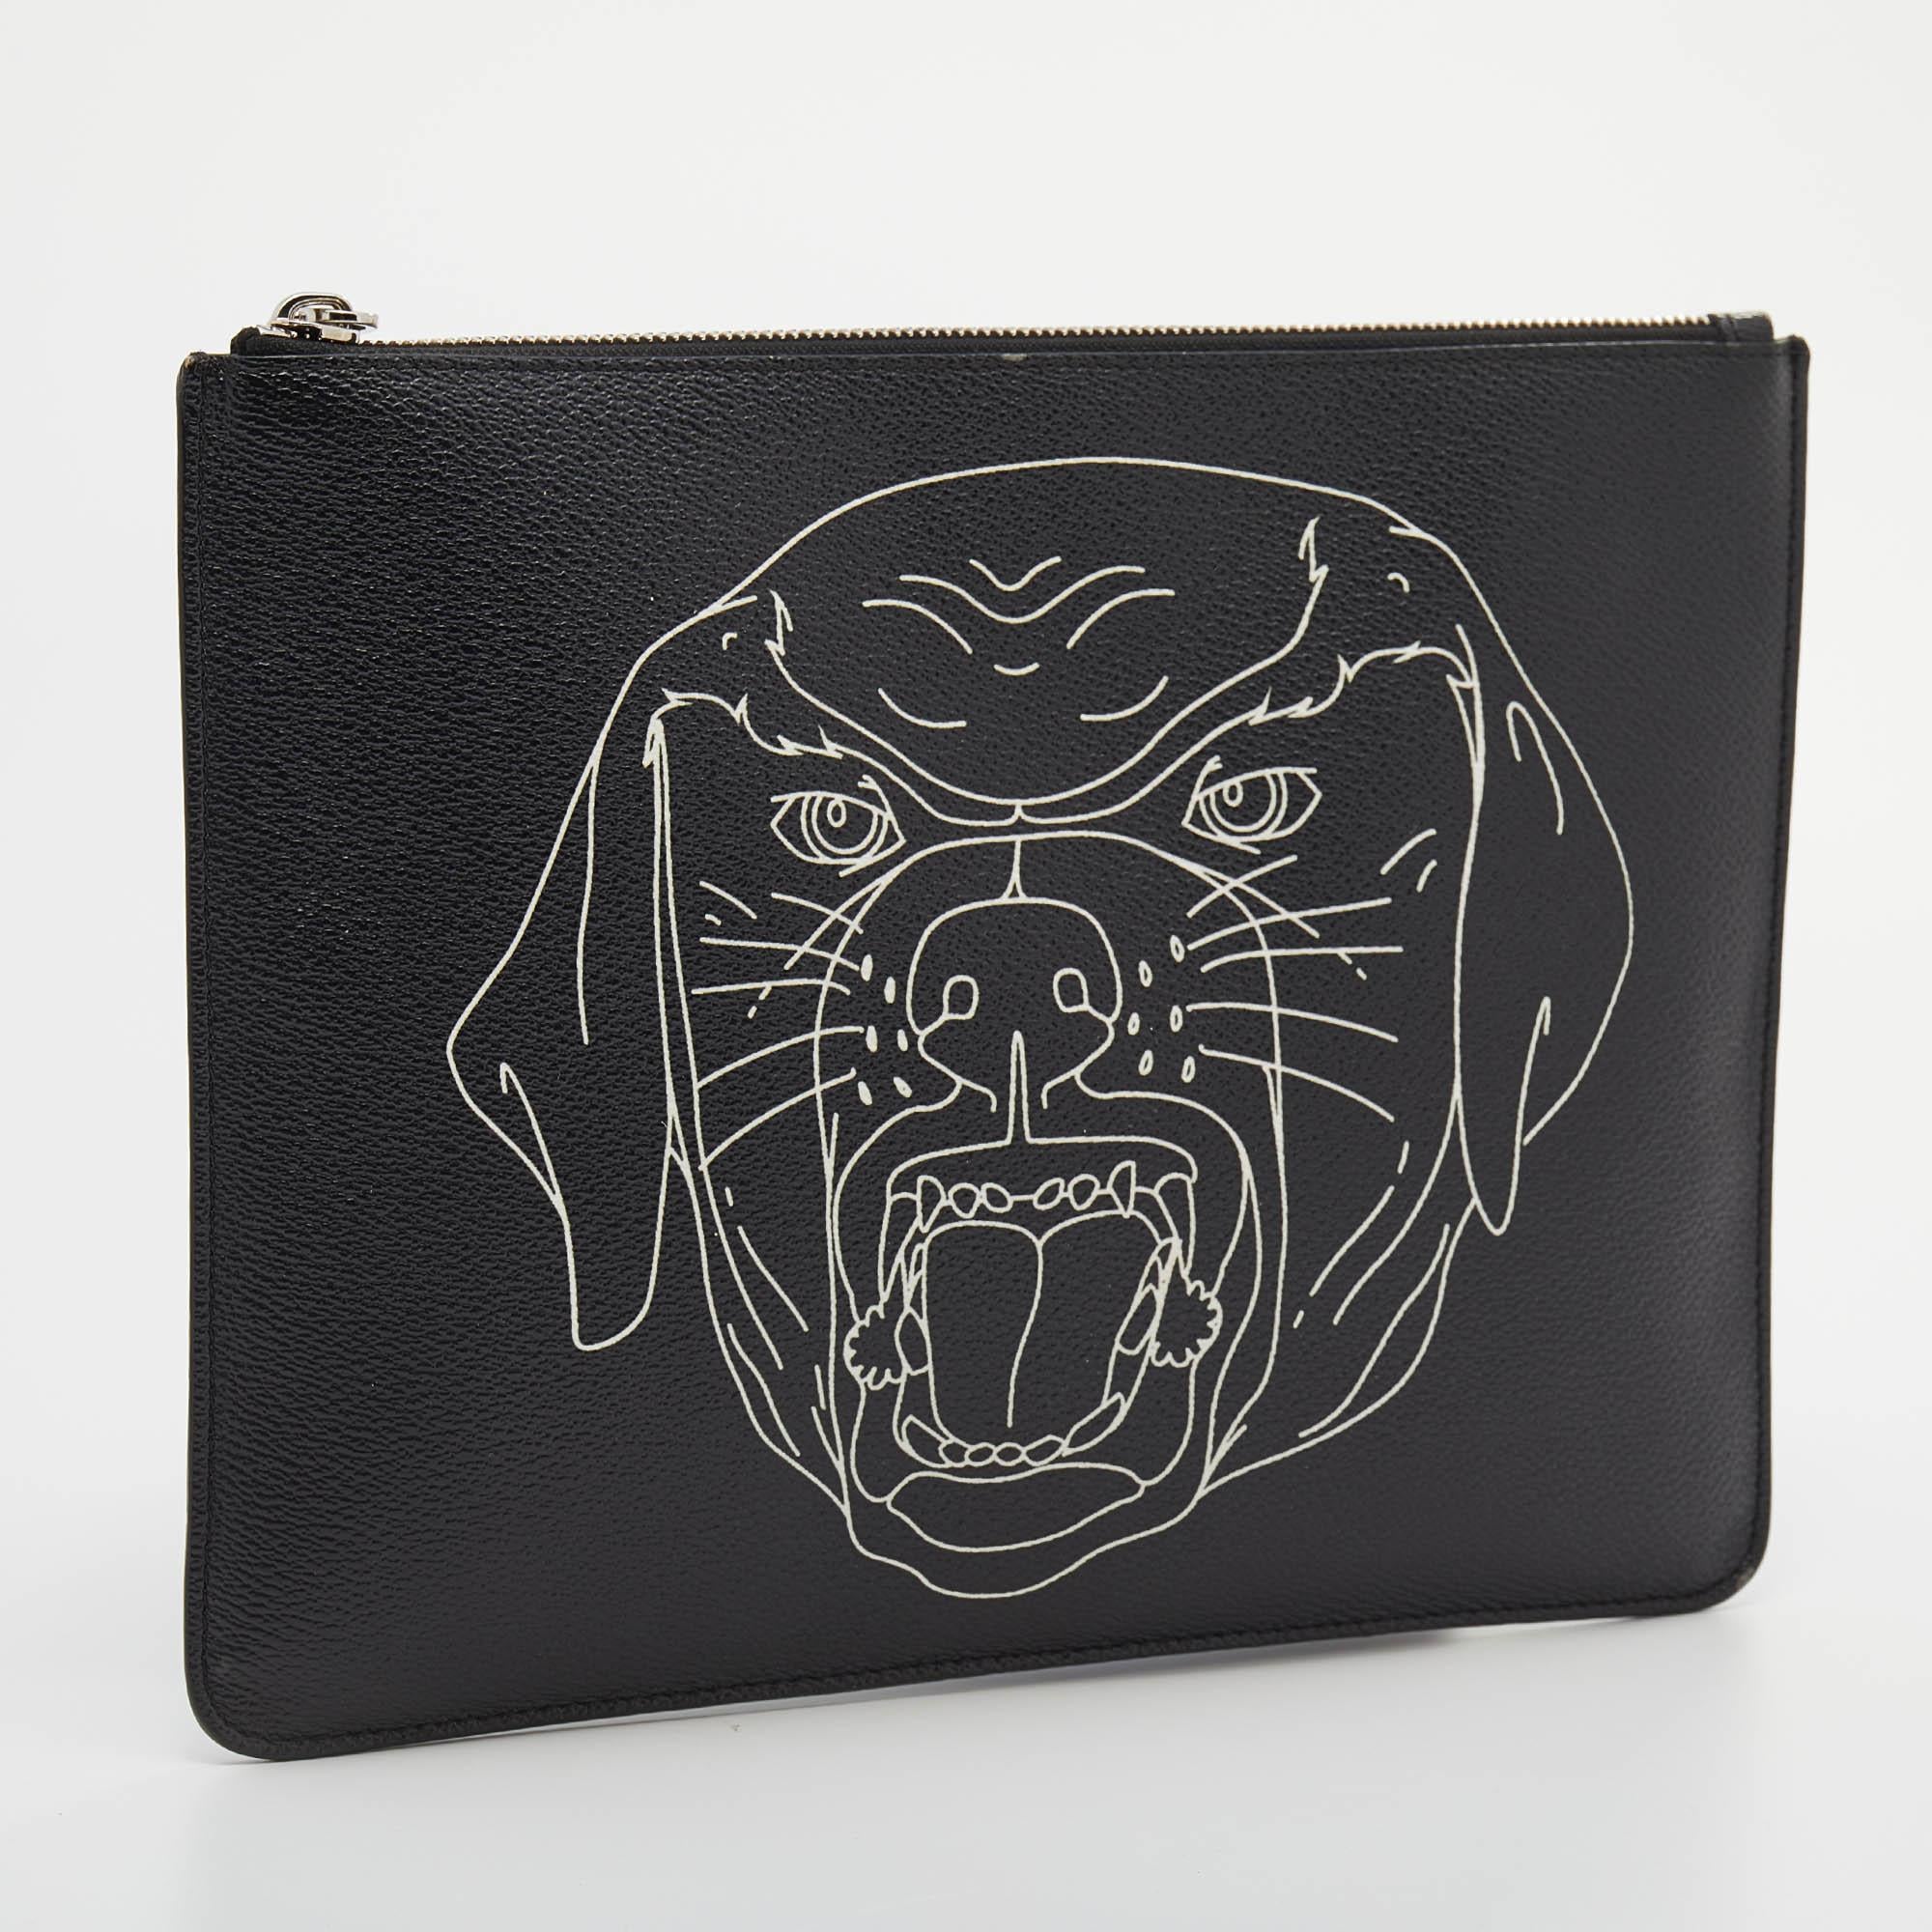 givenchy rottweiler pouch